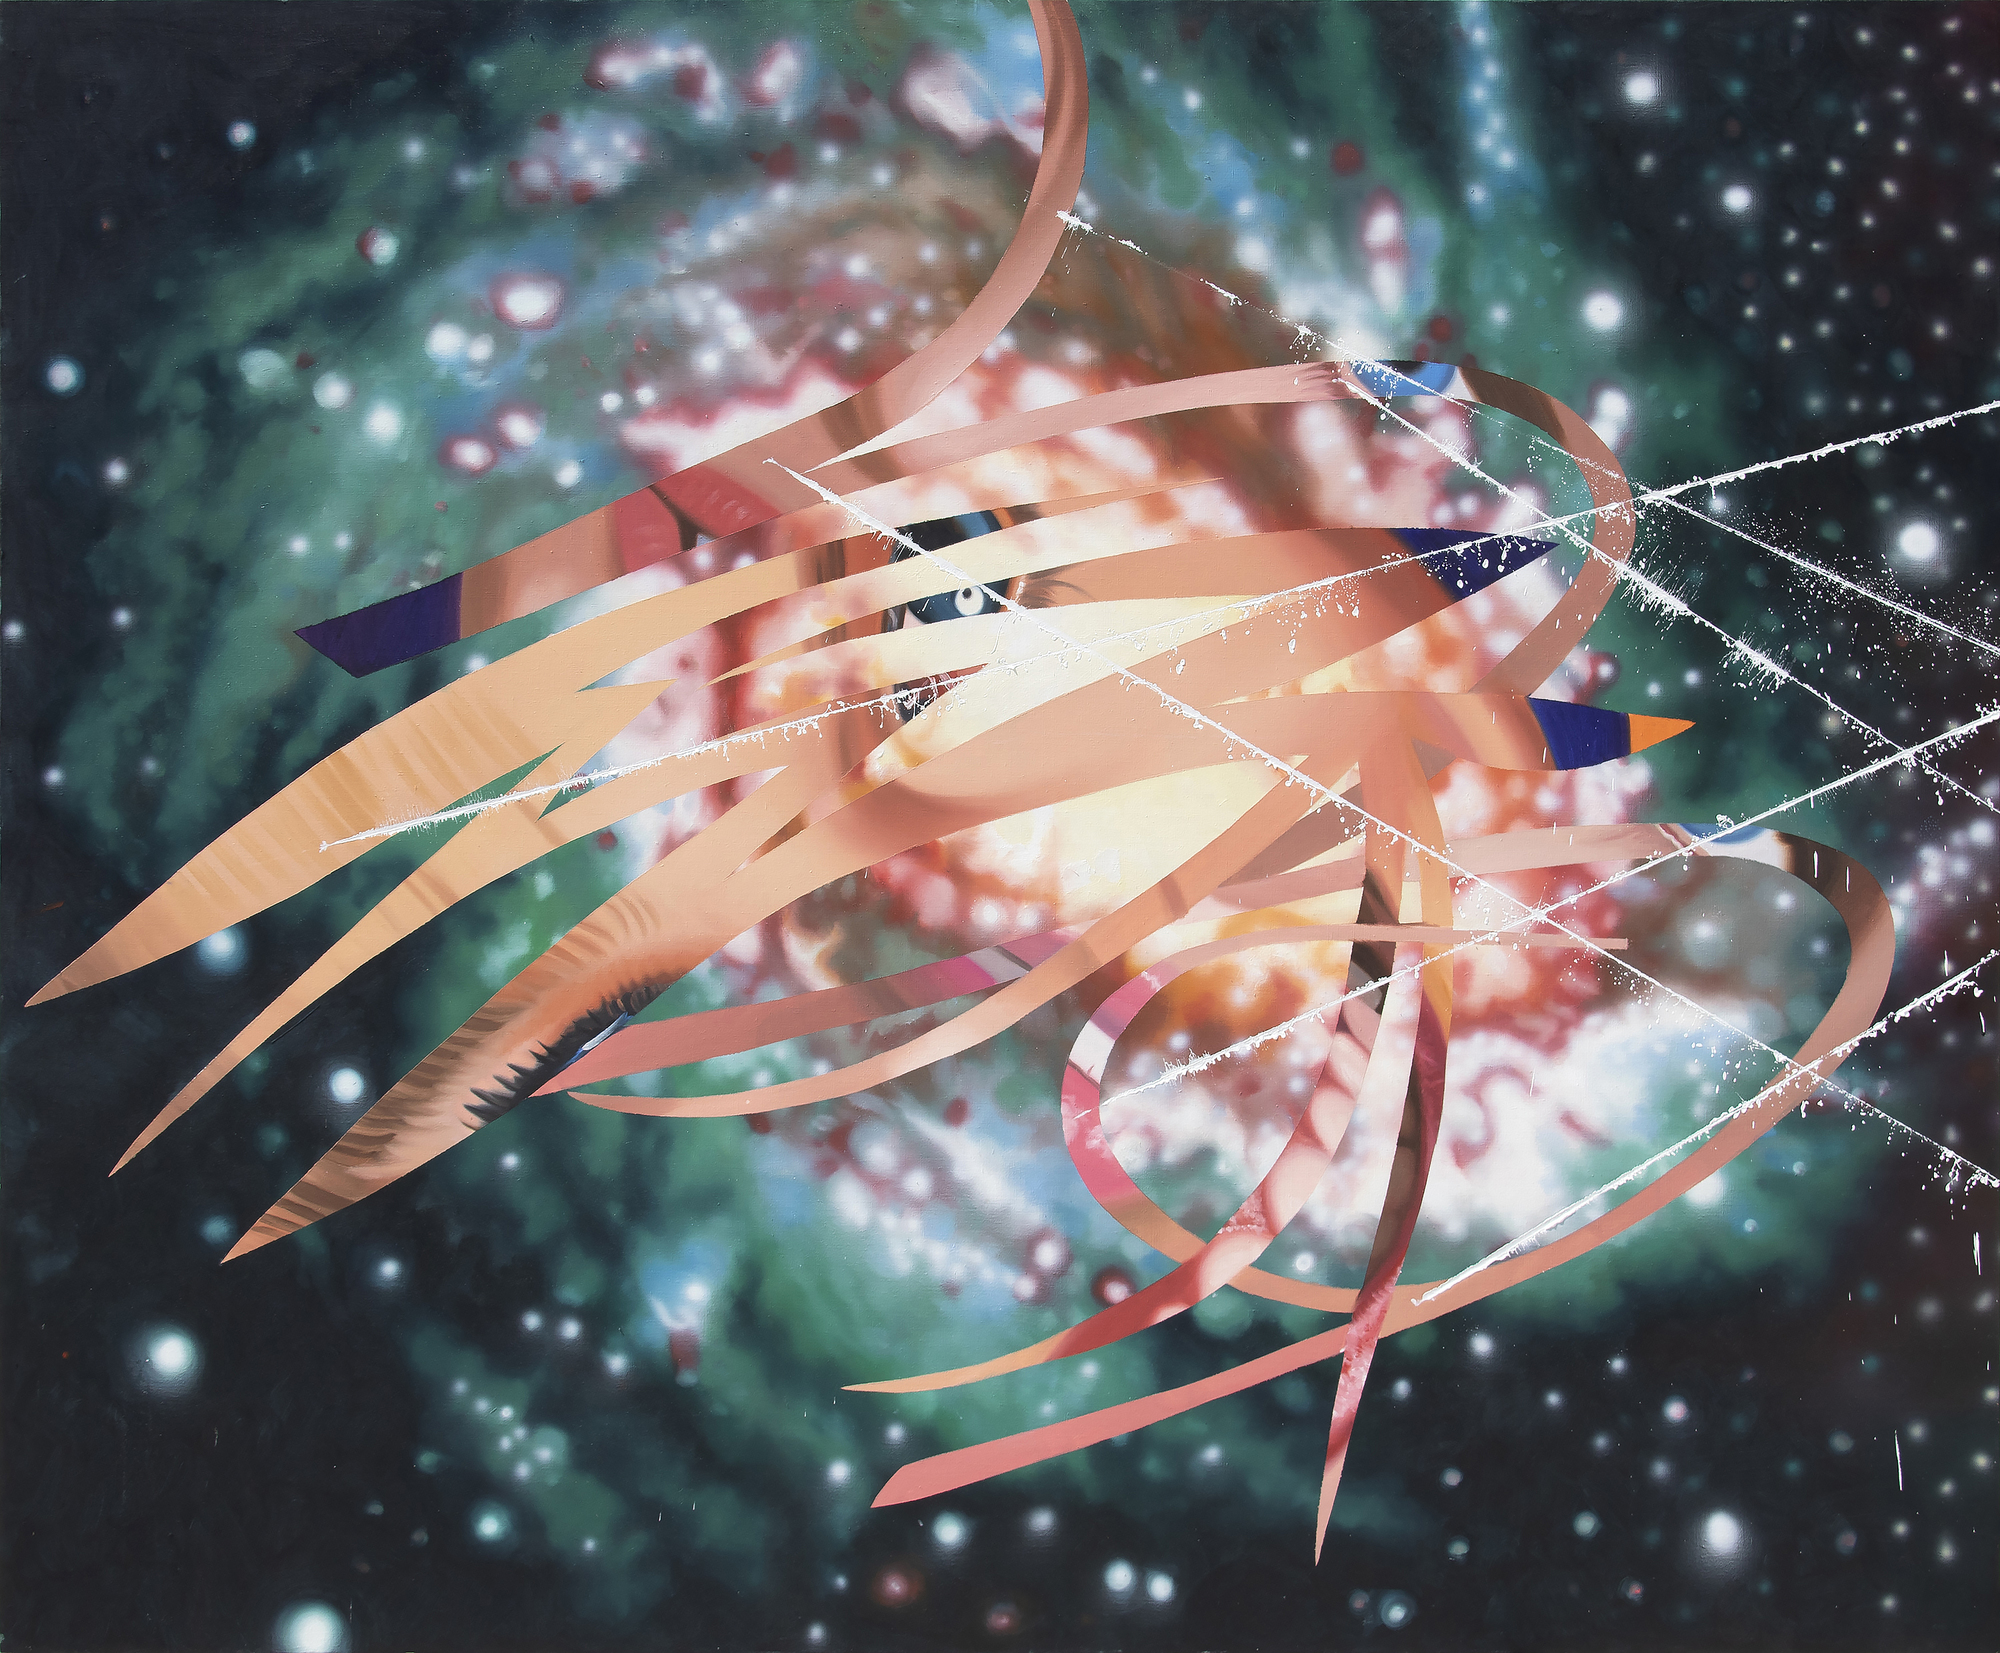 JAMES ROSENQUIST - Television or the Cat's Cradle Supports Electronic Picture - acrylic on canvas over panel - 66 x 240 in.